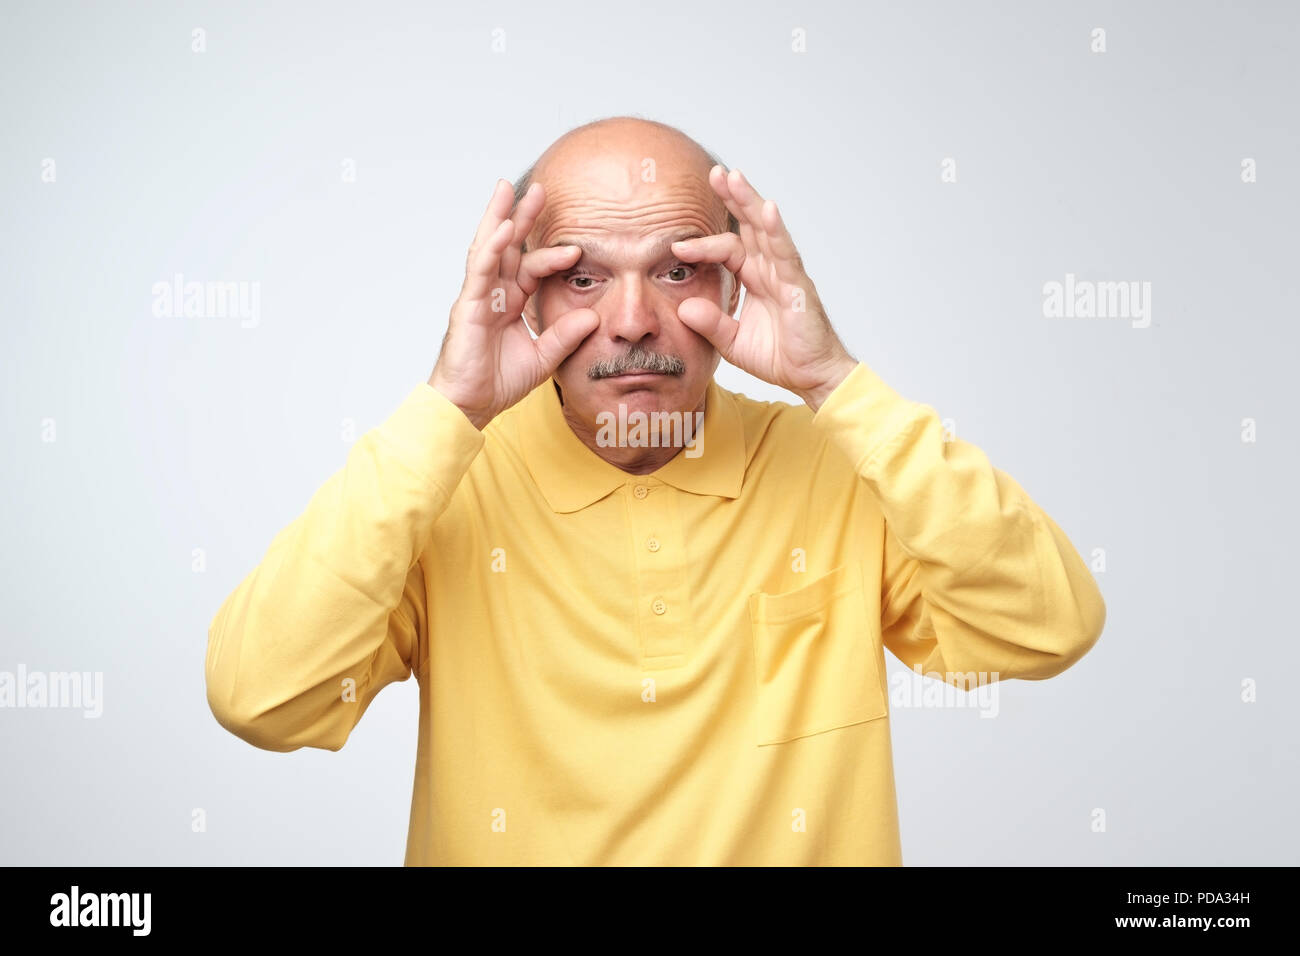 Handsome bored sleepy senior man trying to open his eyes with fingers. Stock Photo